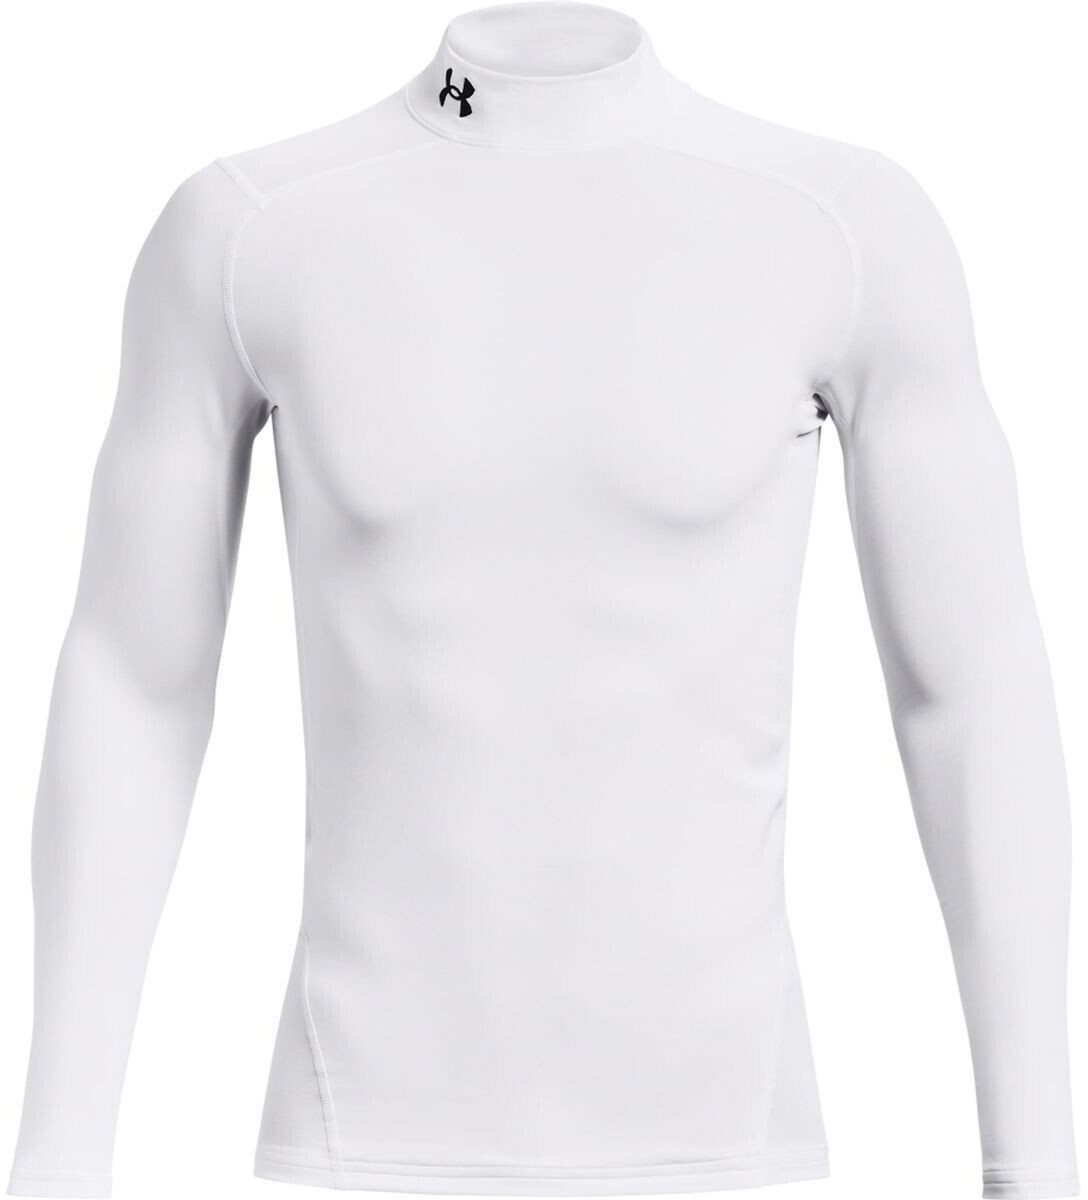 £26.00 Under Mock Best Buy (1366072) Deals ColdGear Armour on from Armour – Compression (Today)